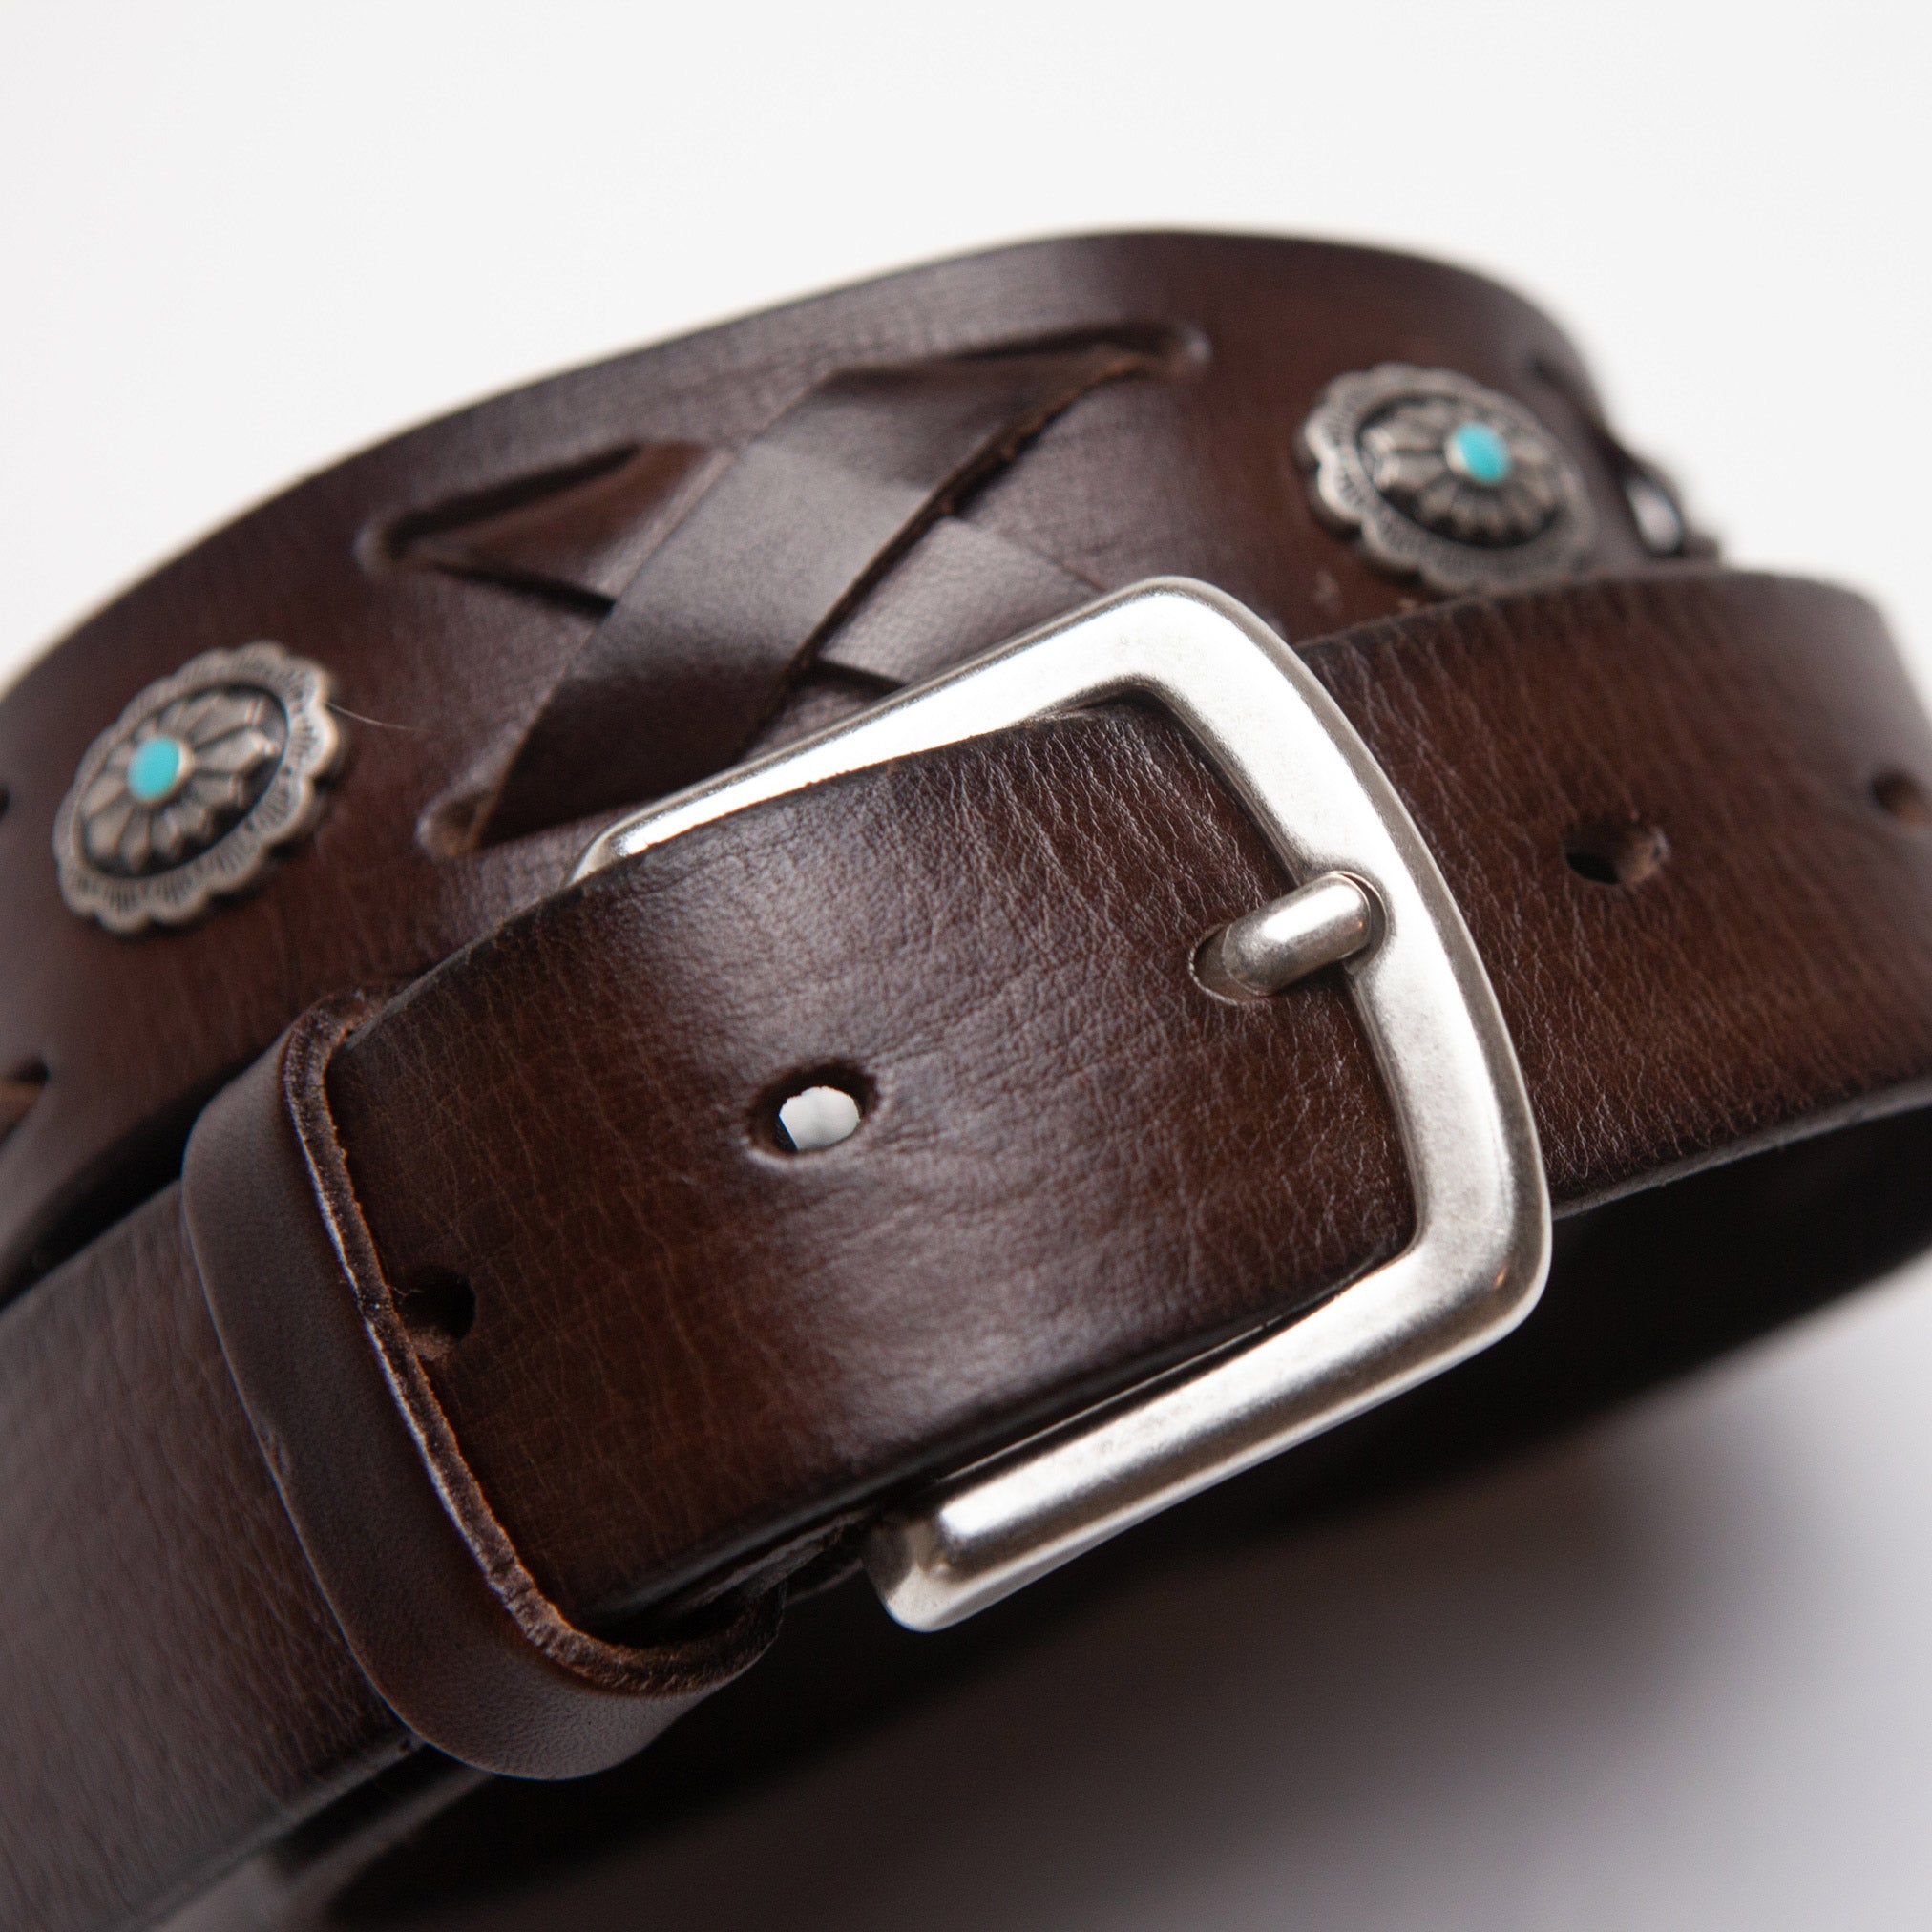 Woven X Brown Leather Belt